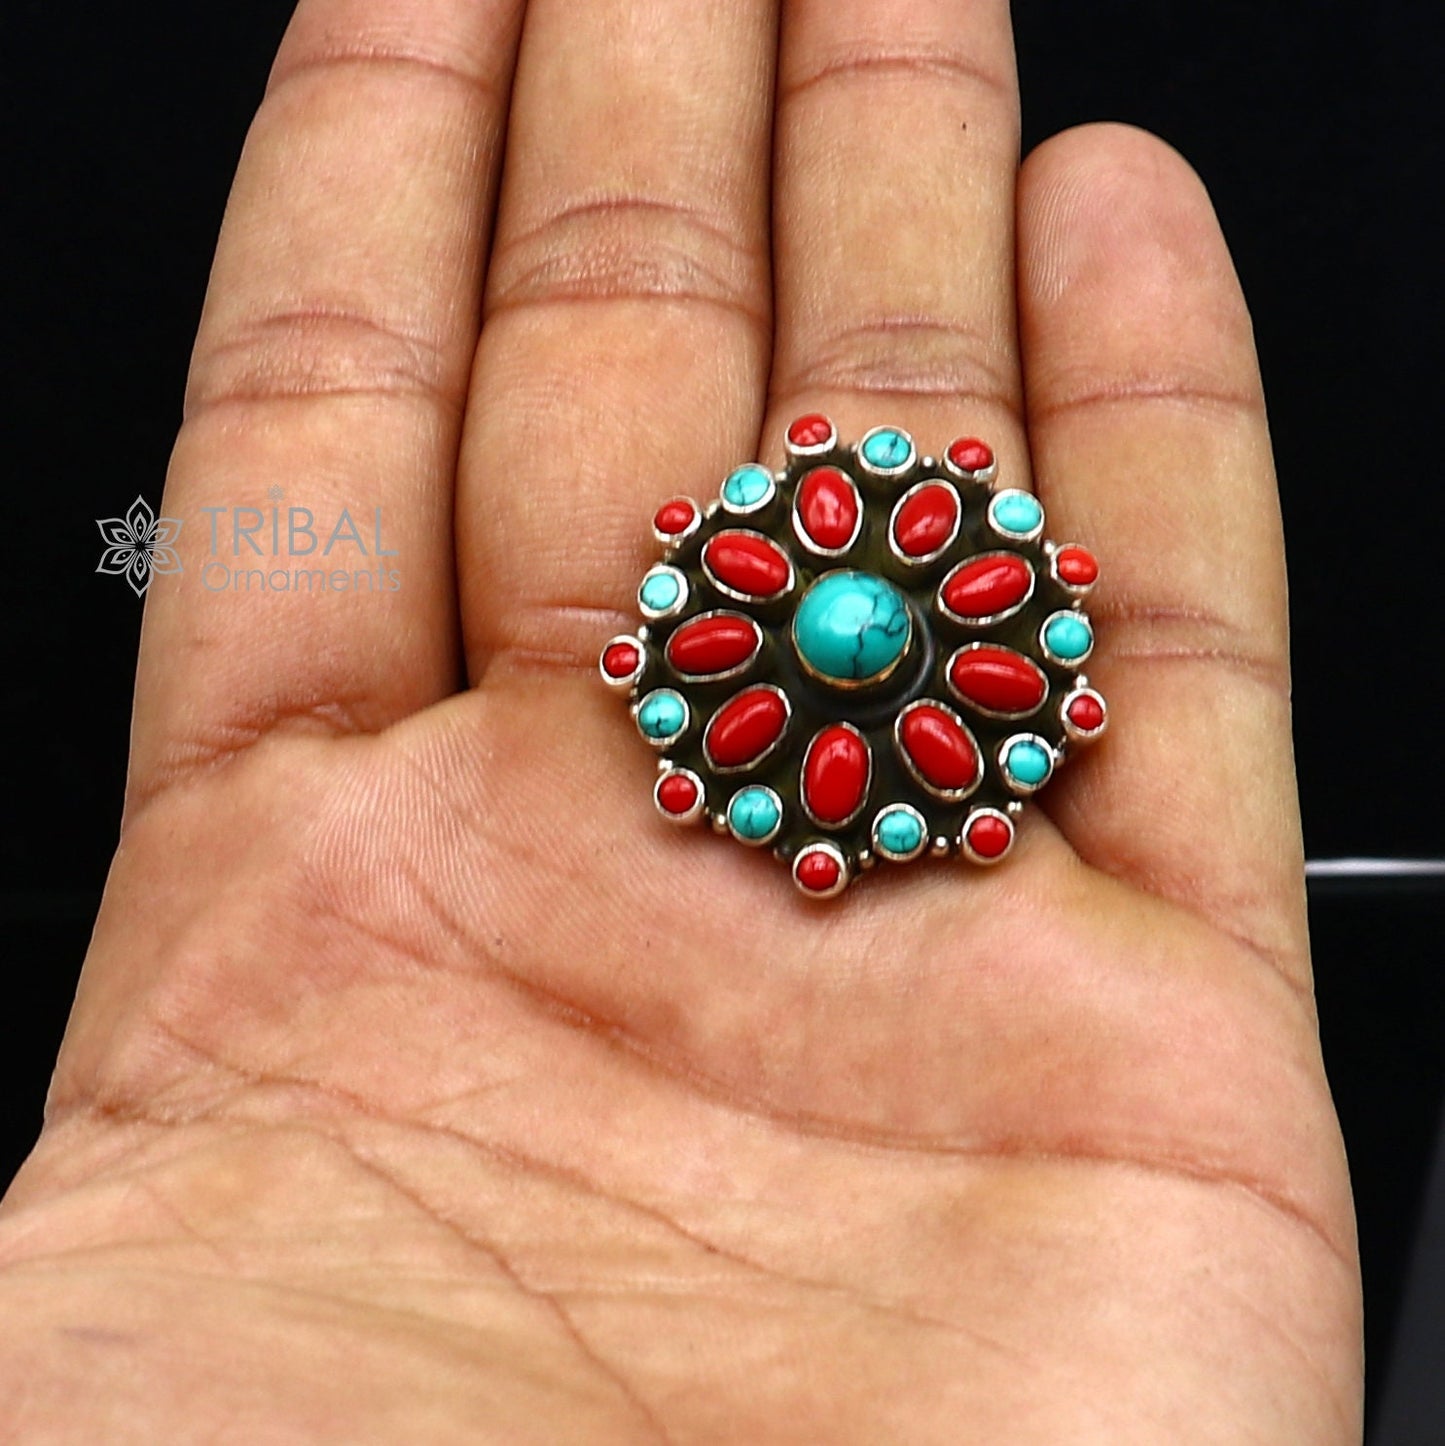 925 sterling silver handmade silver Turquoise and coral stone ring band adjustable ring brides wedding functional jewelry sr403 - TRIBAL ORNAMENTS